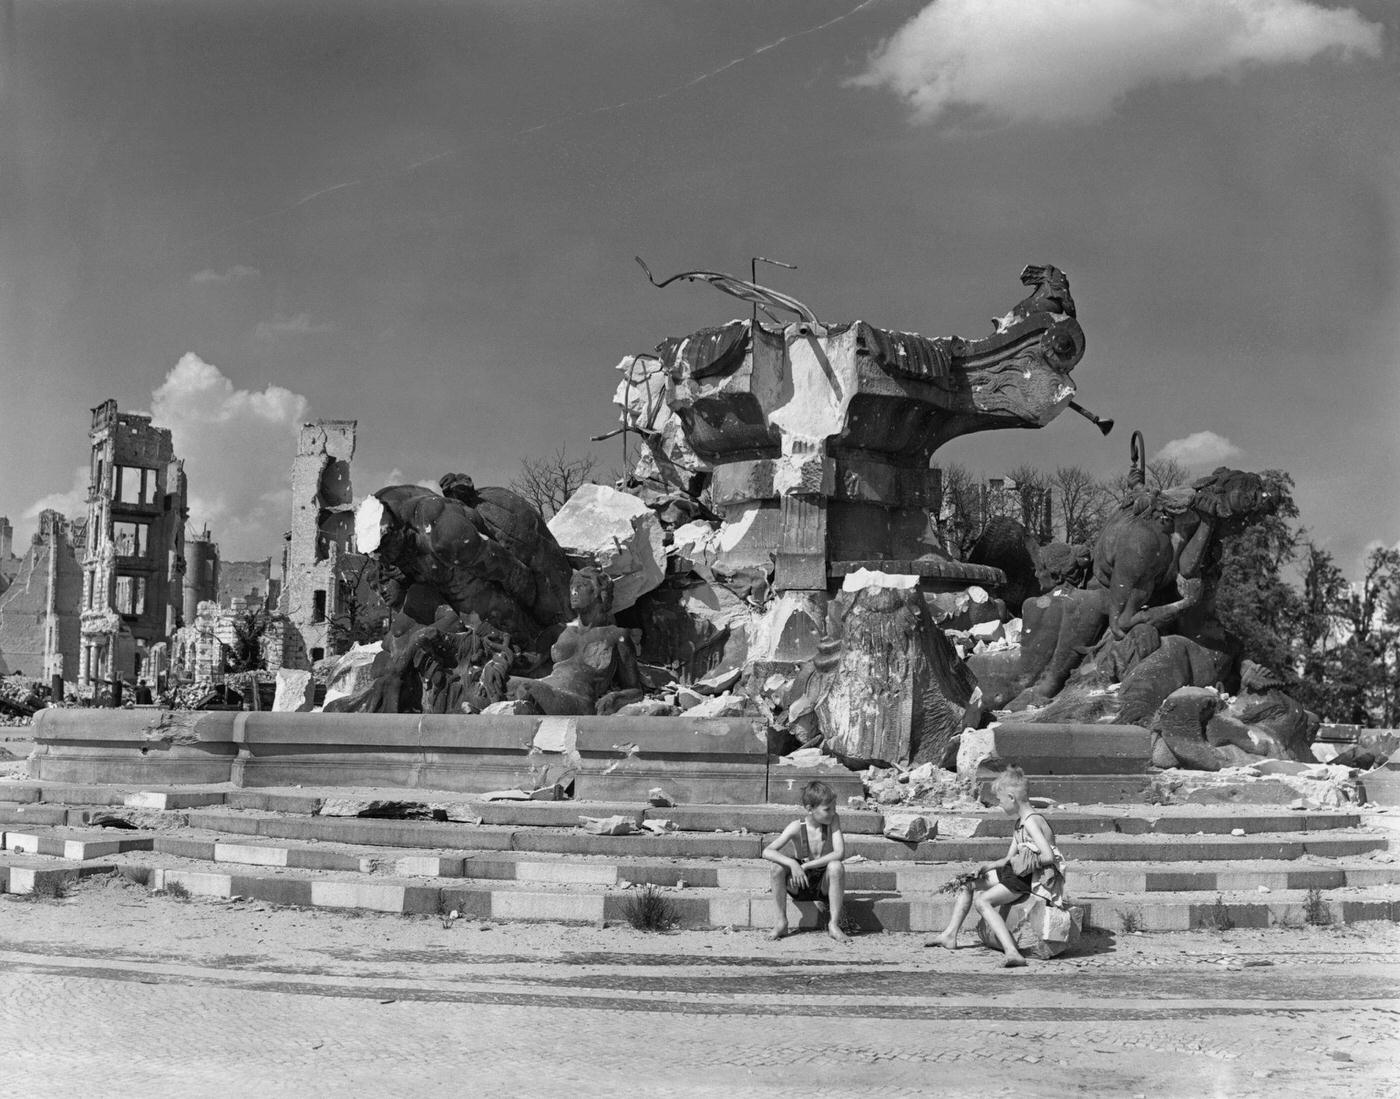 Boys on the steps of the ruins of the Hercules Statue in Rutz Platz, Berlin, 1945.